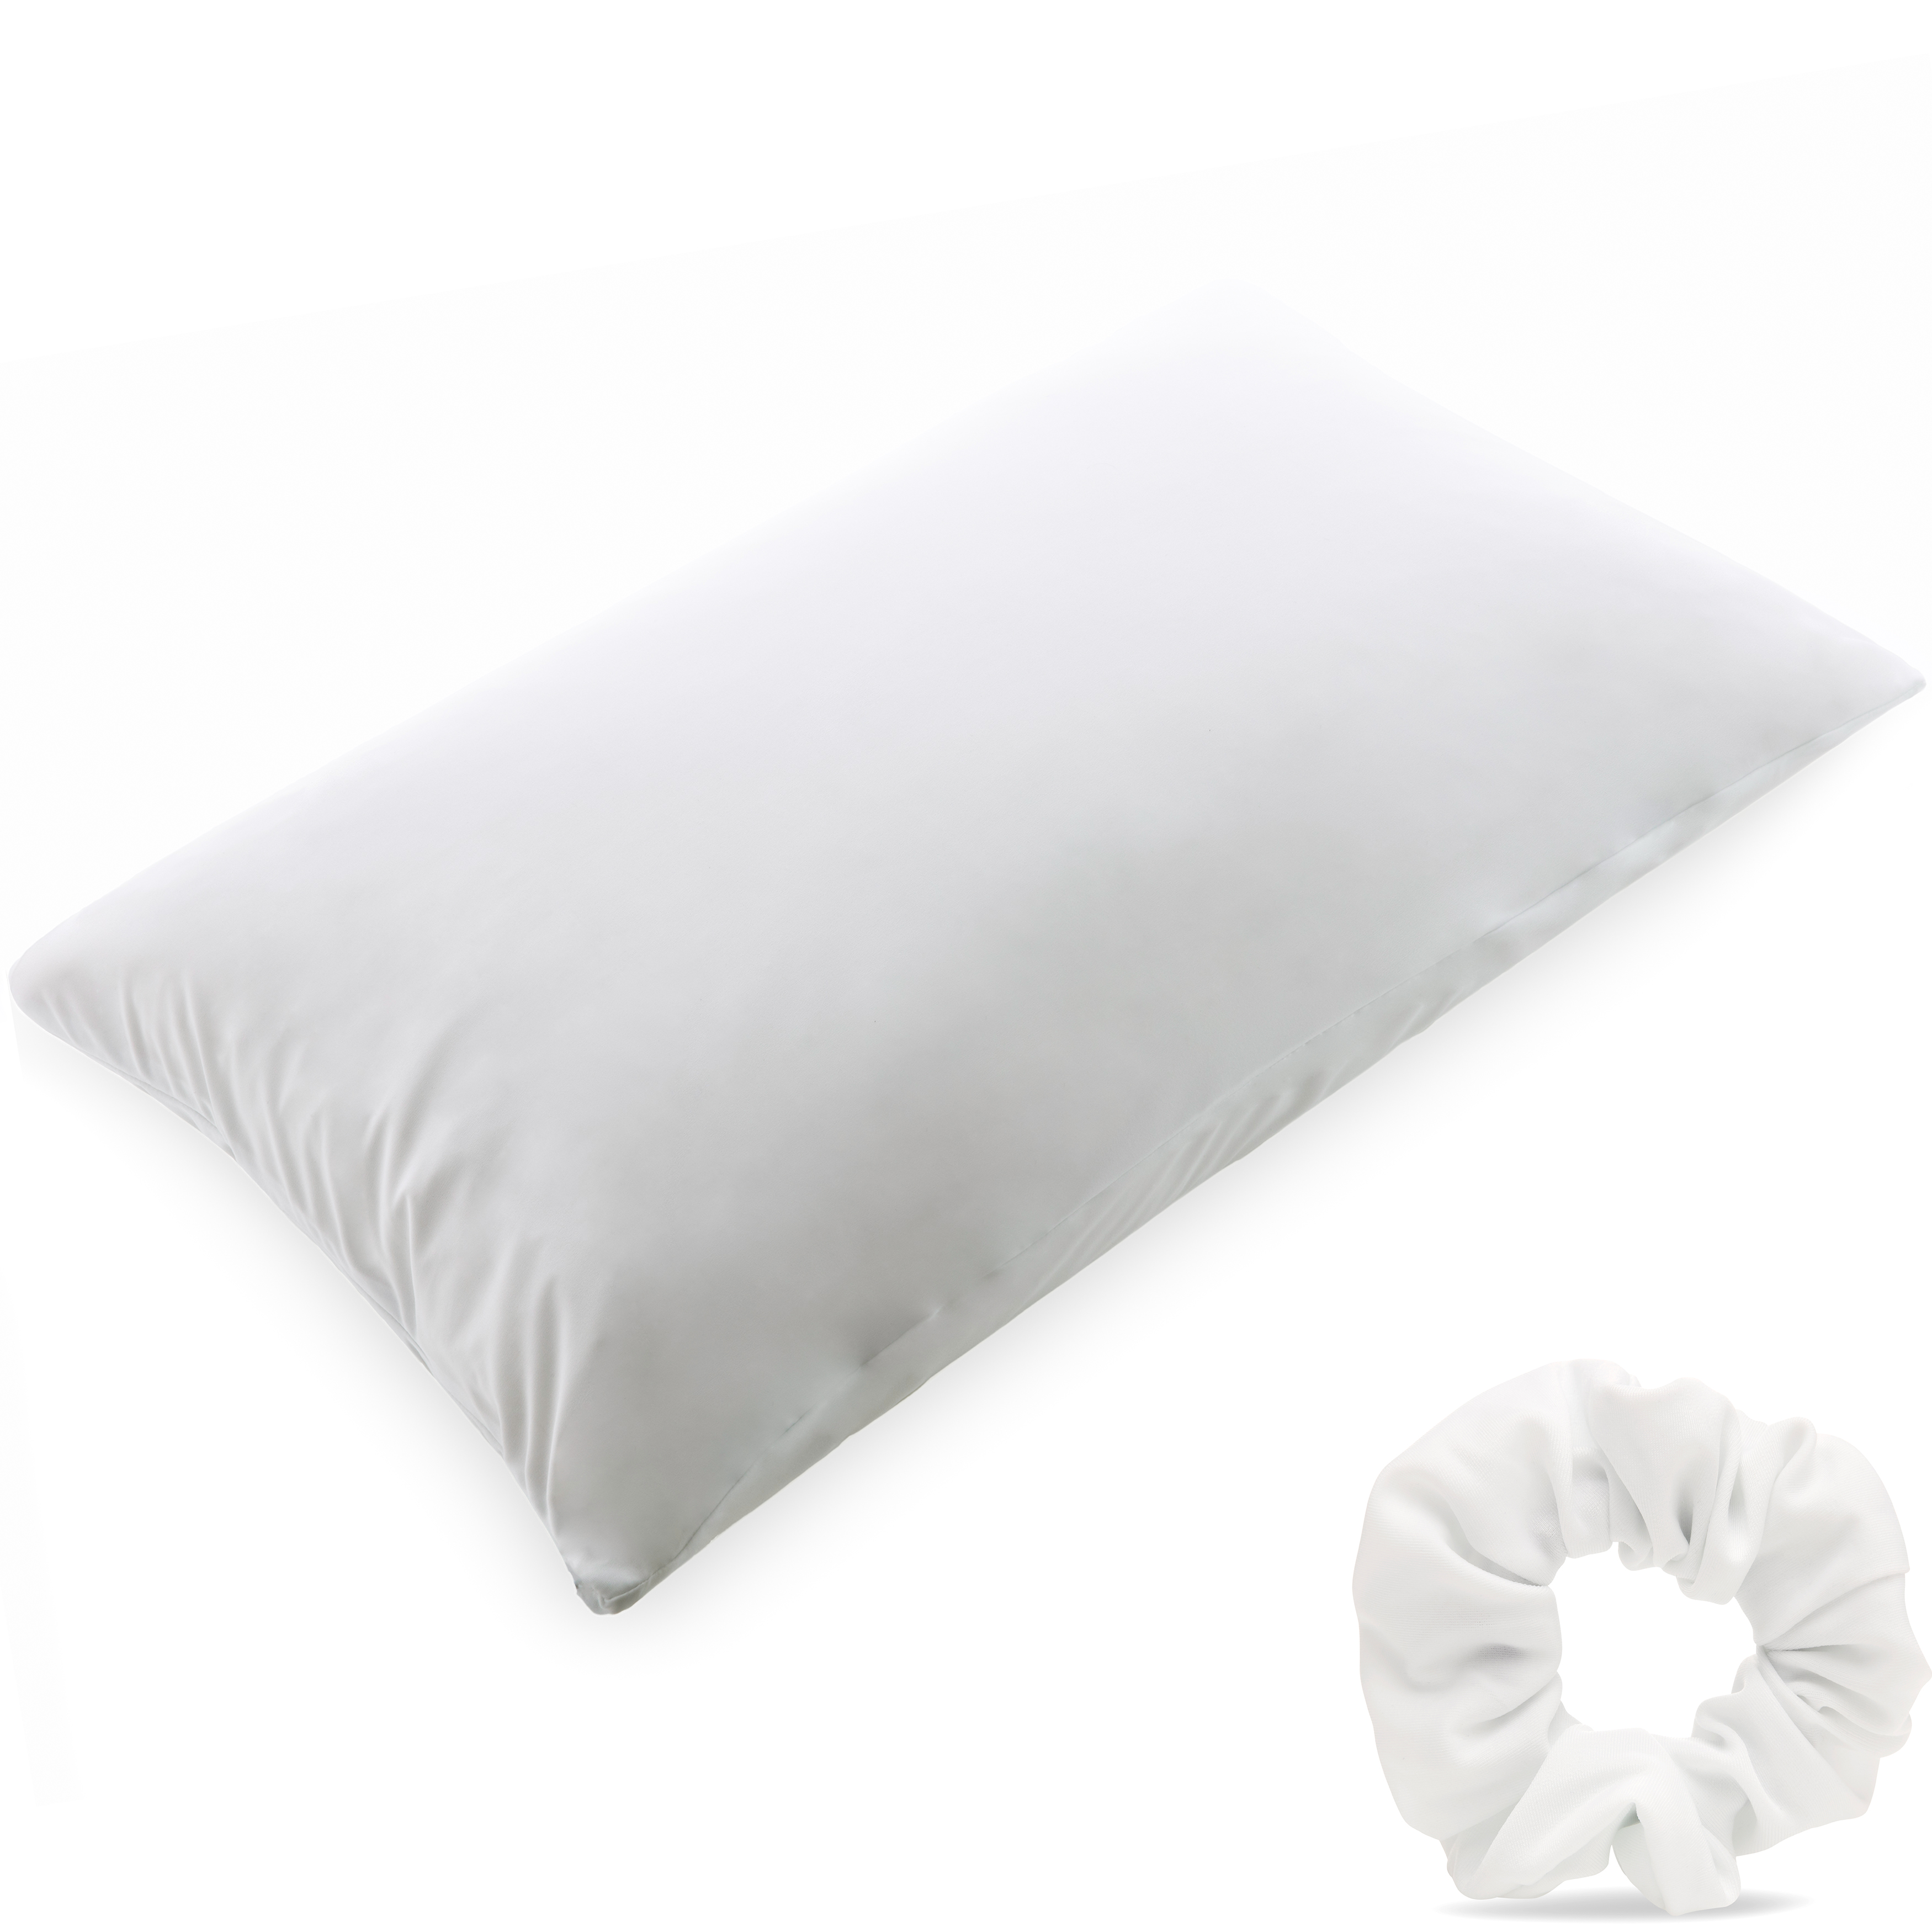 Matte Details about   Beauty Pillow Cover Keeps Hair Tangle Free and Bonus Matched Scrunchie 